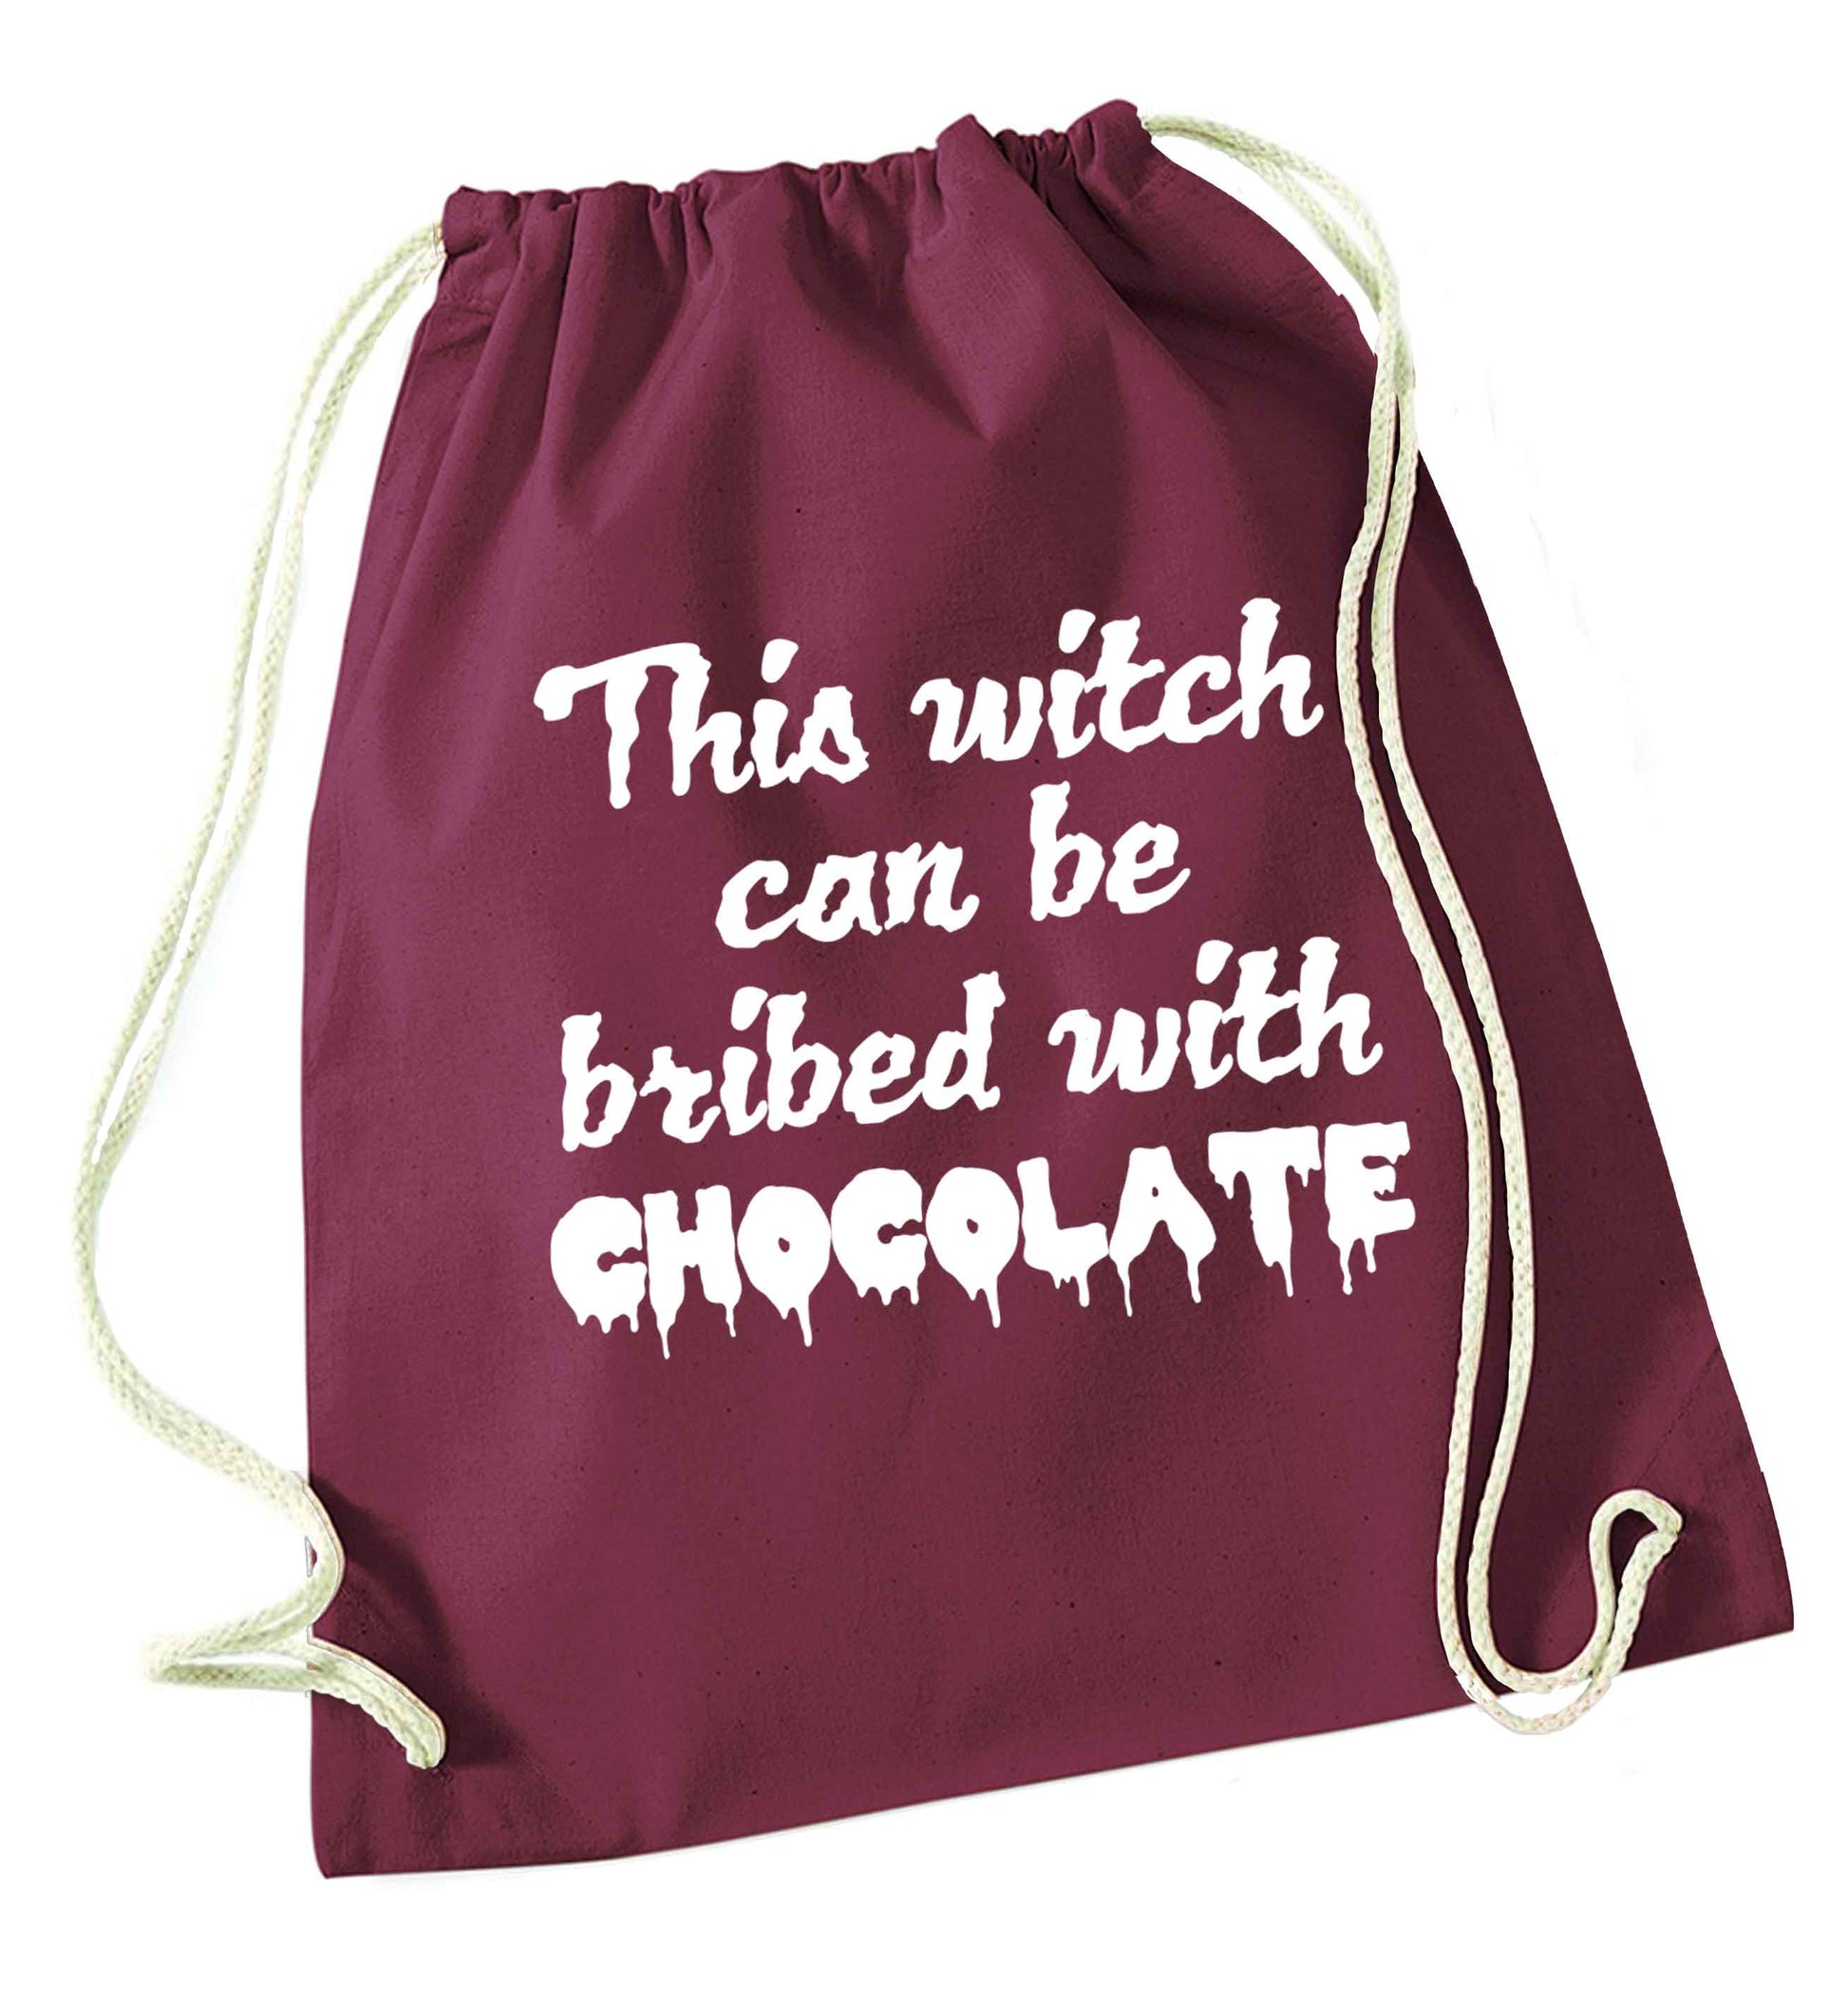 This witch can be bribed with chocolate maroon drawstring bag